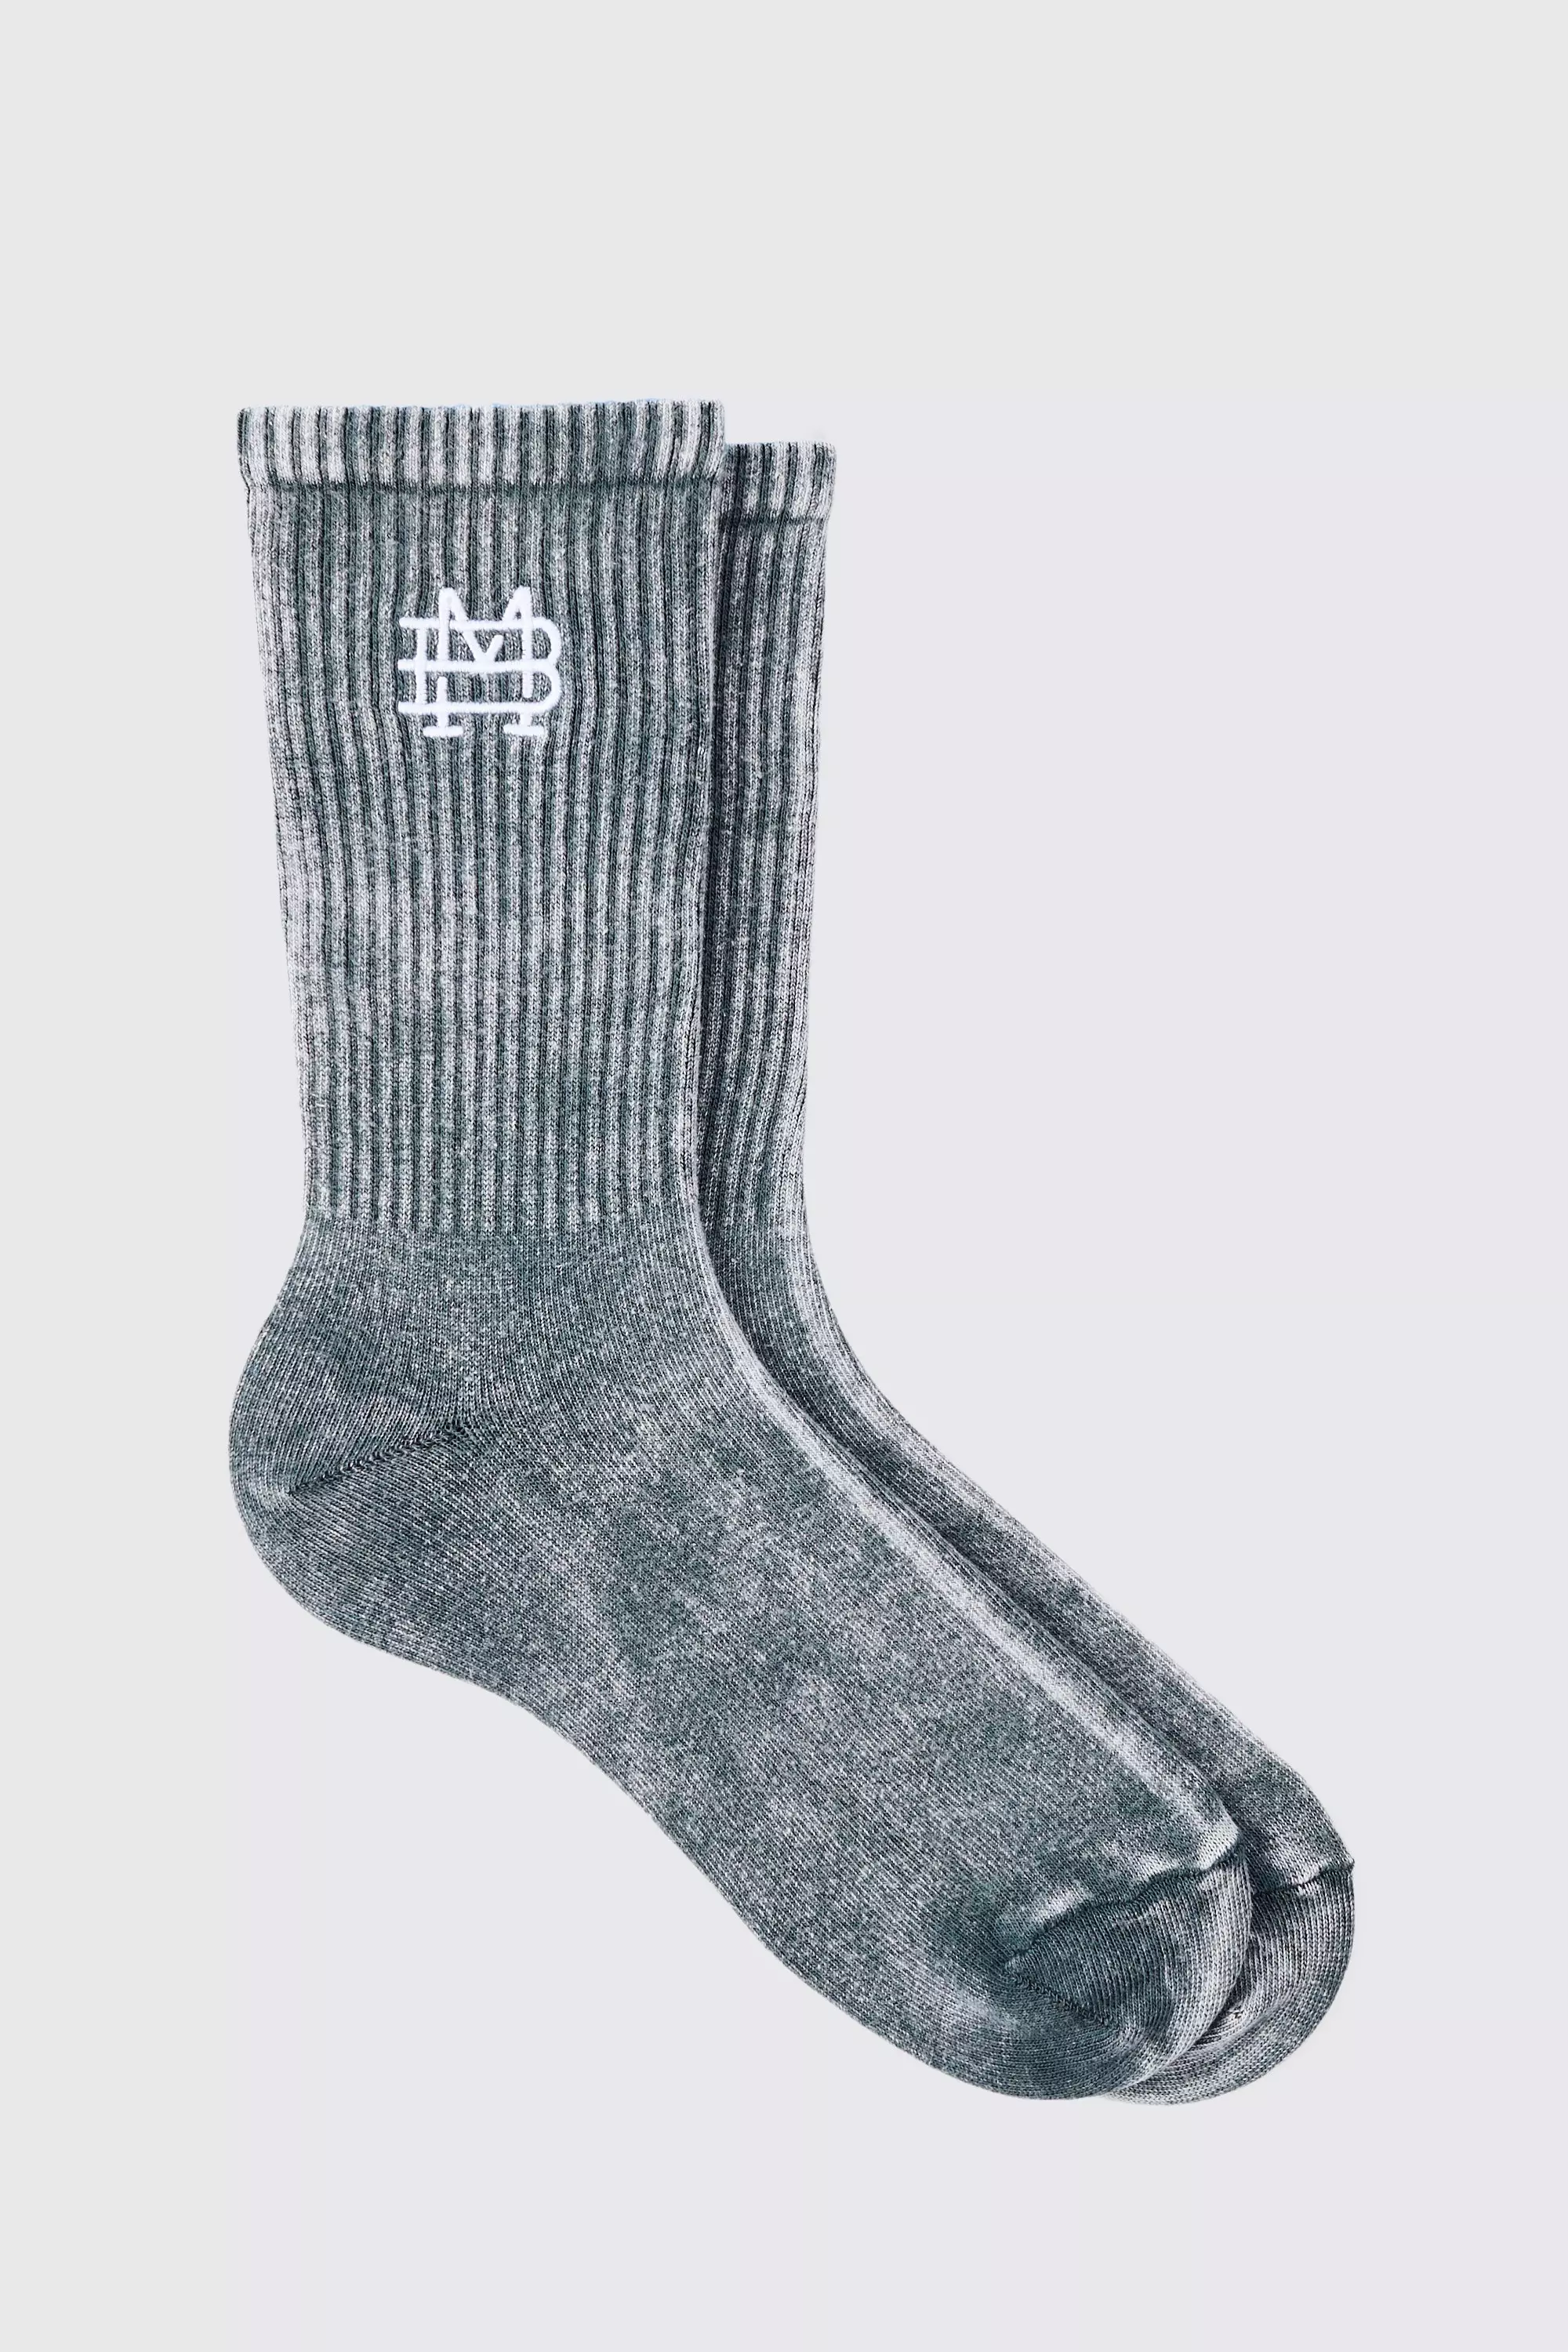 Acid Wash Bm Embroidered Socks In Charcoal Charcoal